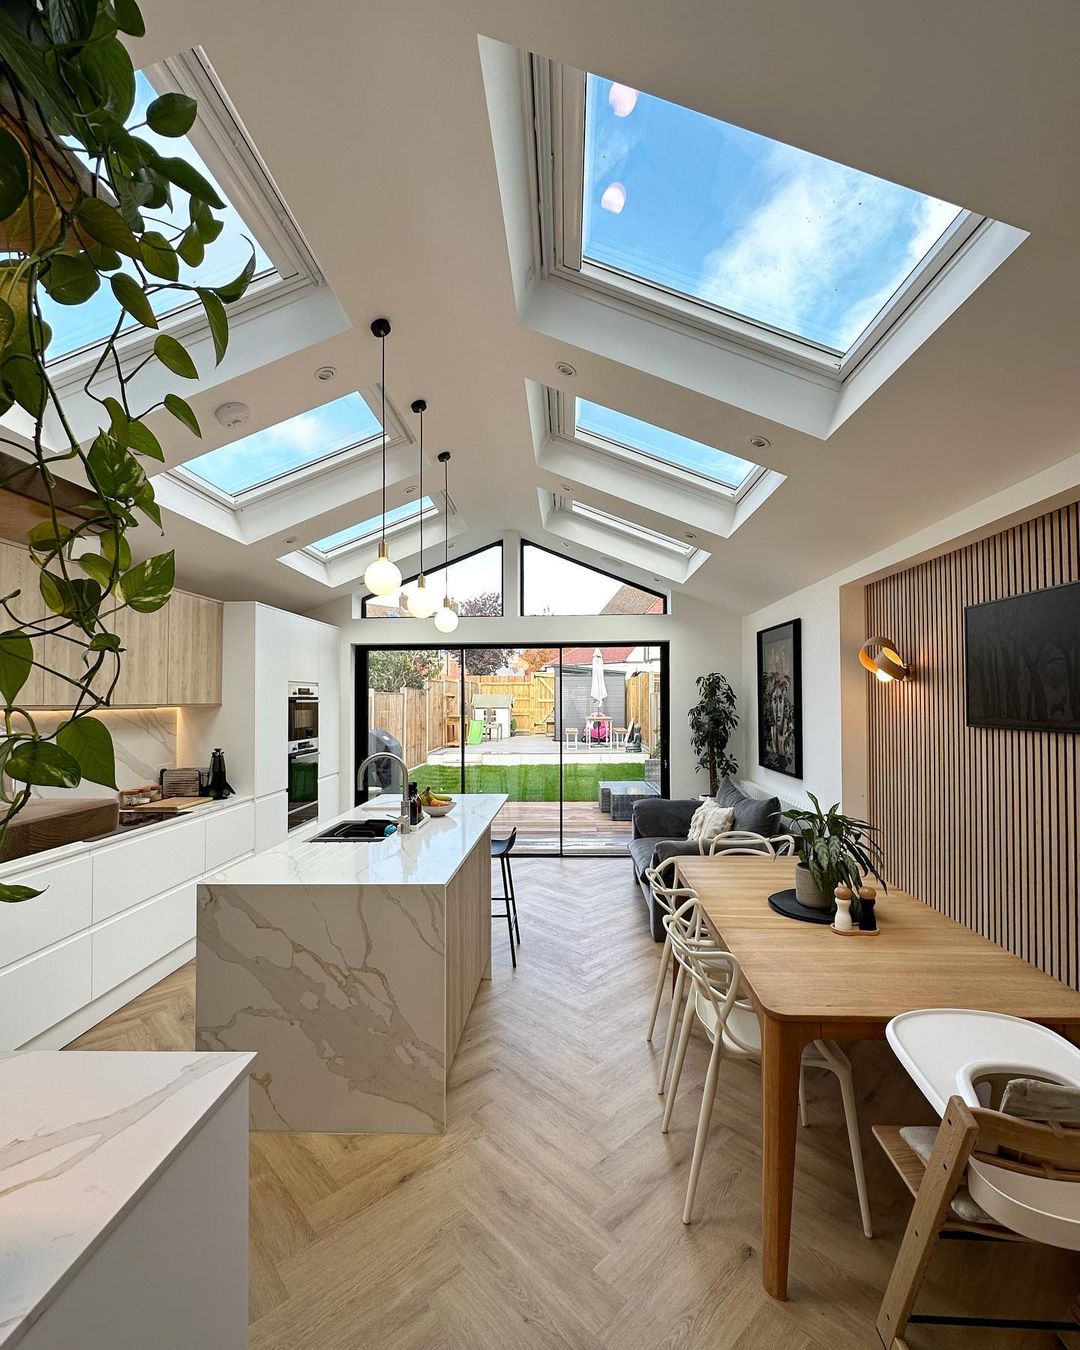 kitchen with multiple skylights provide ample natural light to create a unique indoor experience